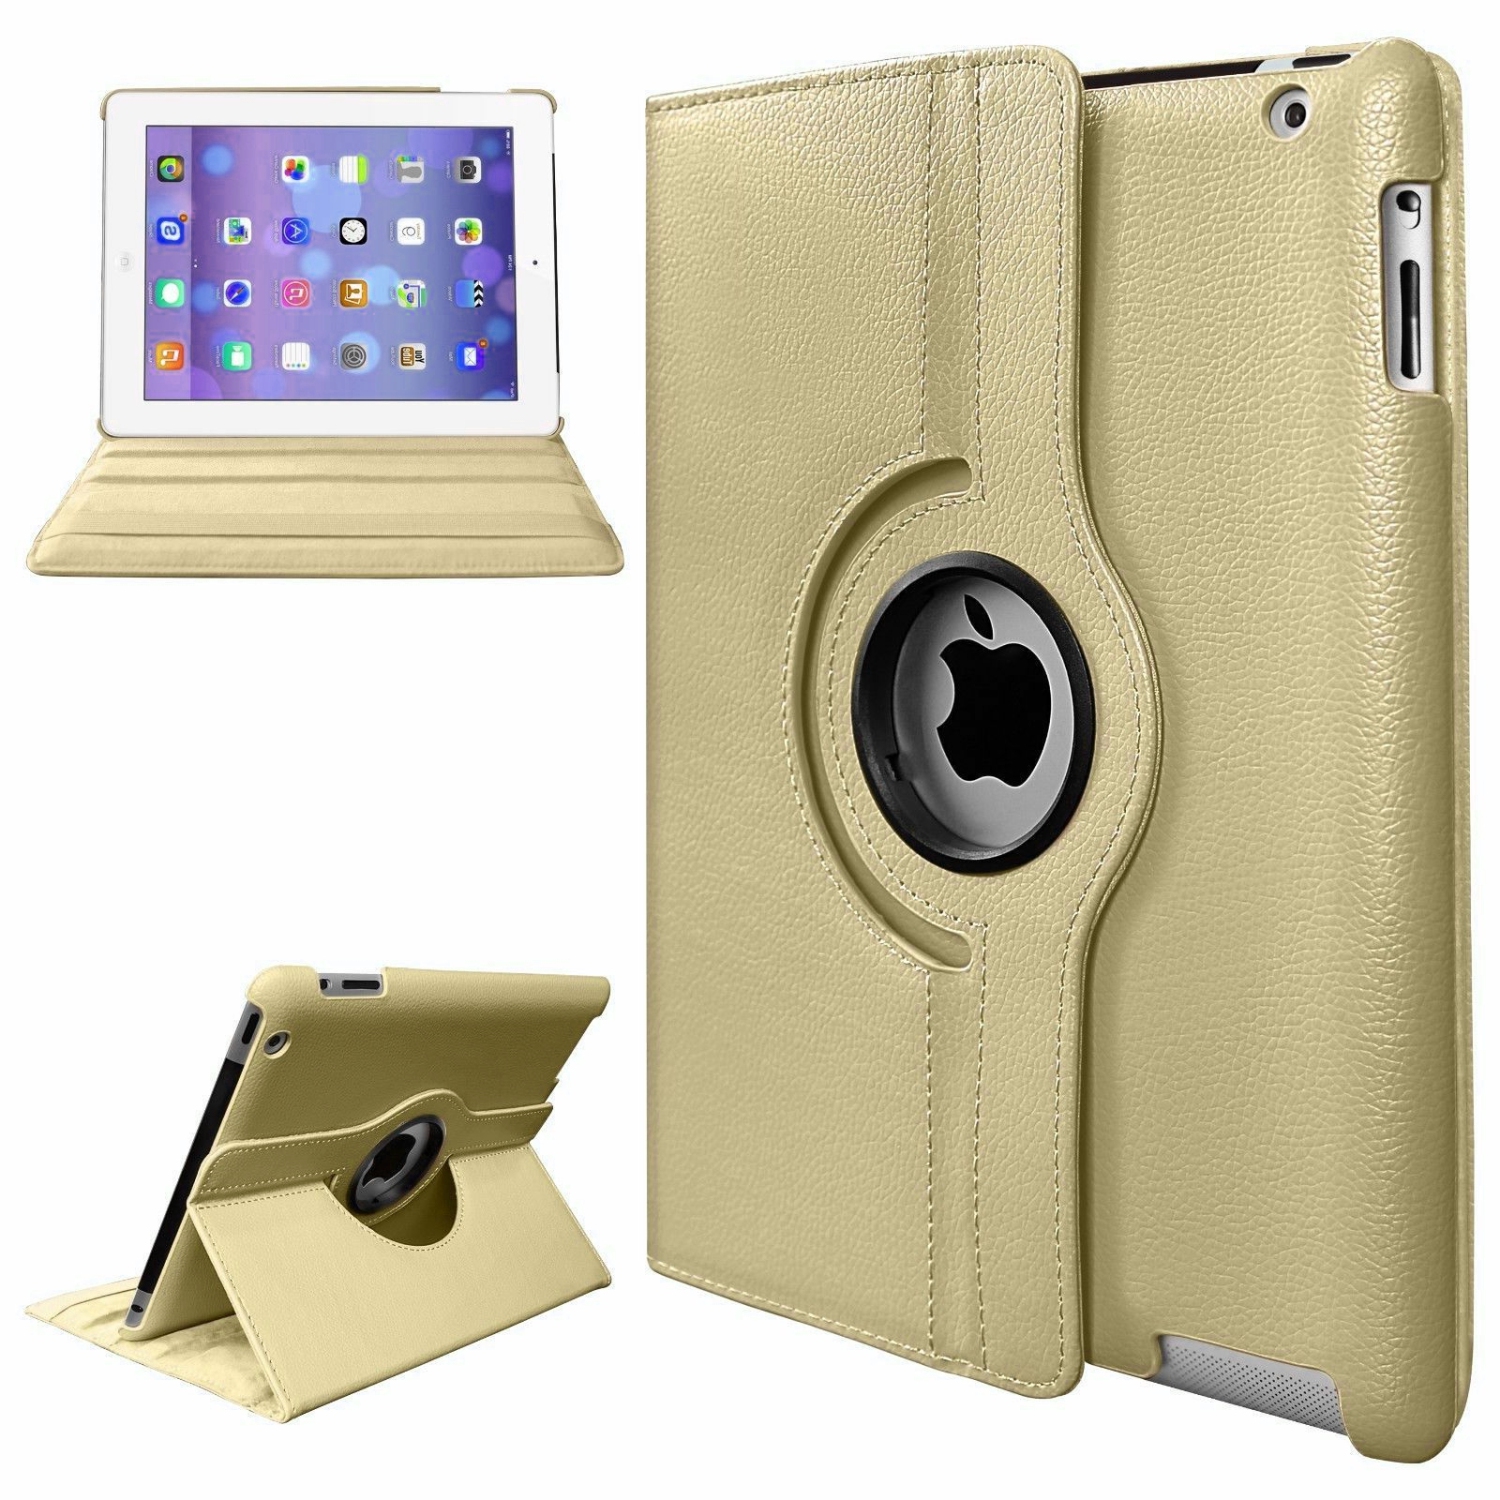 【CSmart】 360 Rotating PU Leather Stand Case Smart Cover for iPad Air 1 2 1st 2nd Gen, Gold